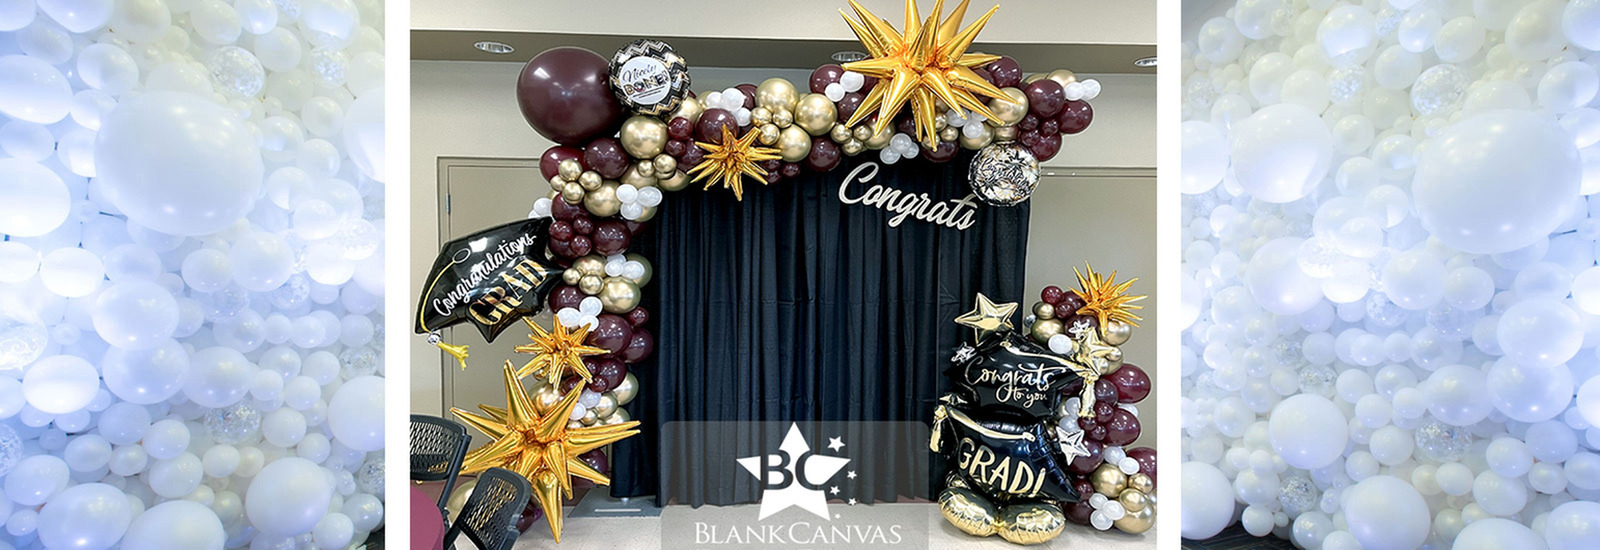 Black Drape Backdrop with Maroon, White and Gold Latex Organic Balloon Garland with Grad Foil Balloons